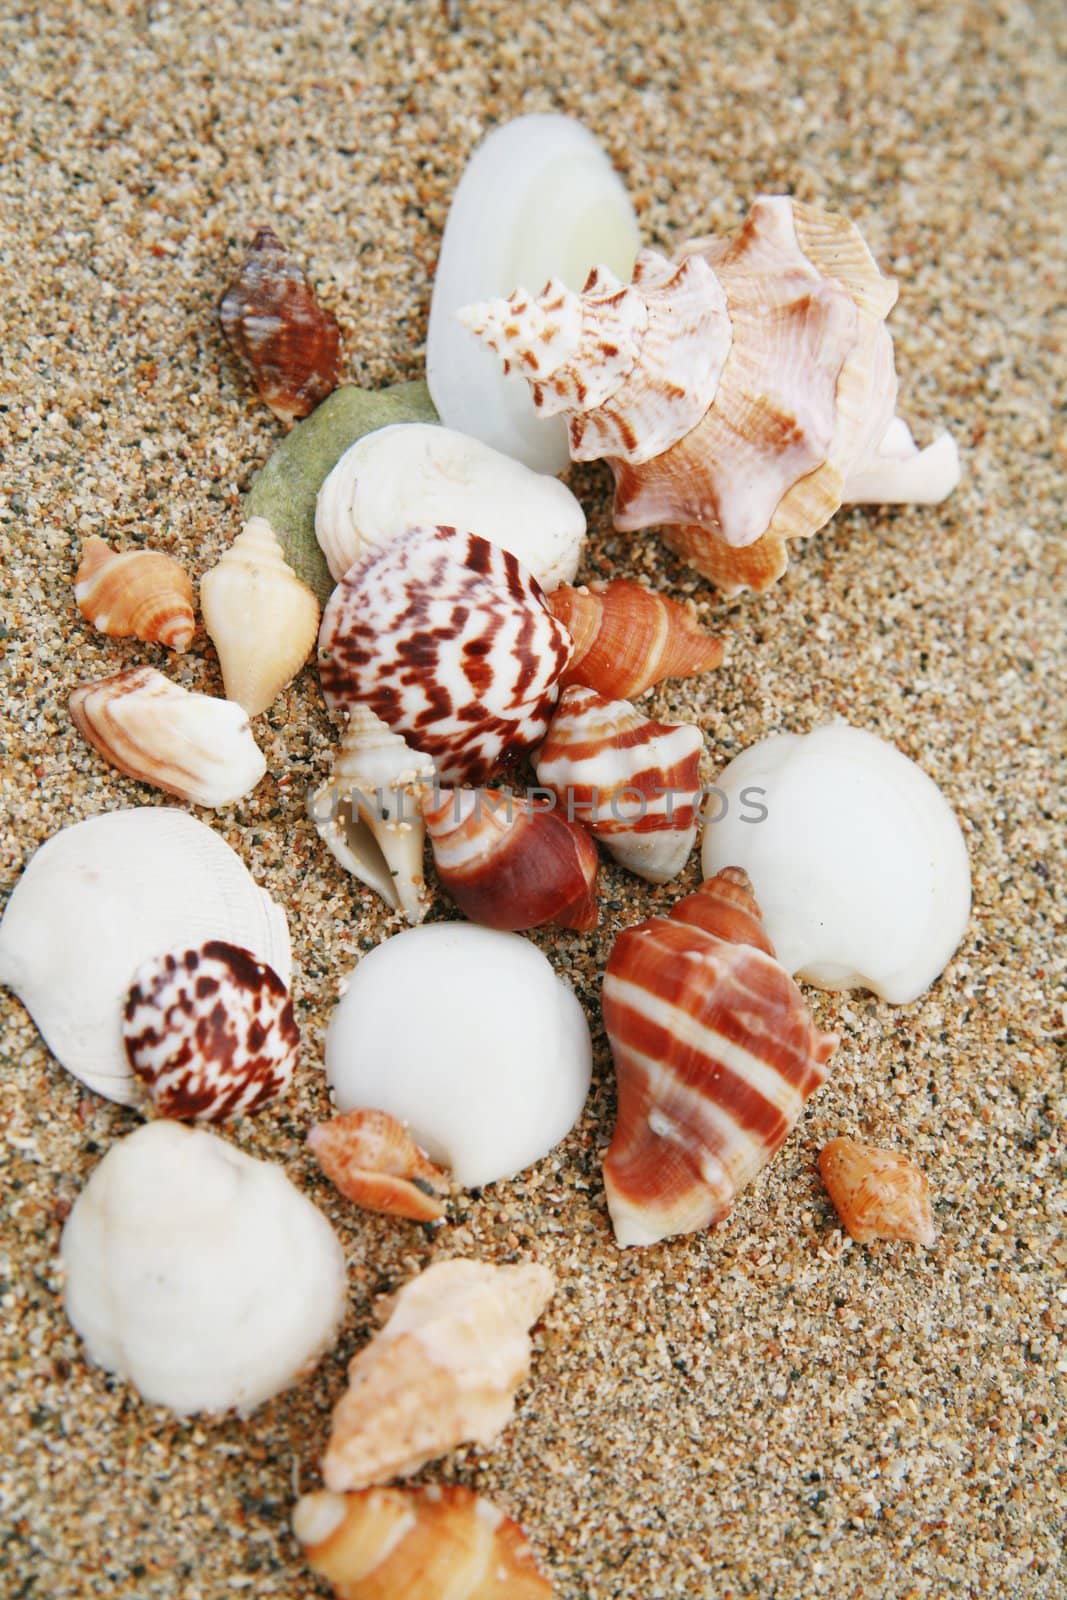 beautiful shells on very nice beach, focus in on the shells (shallow DOF)............